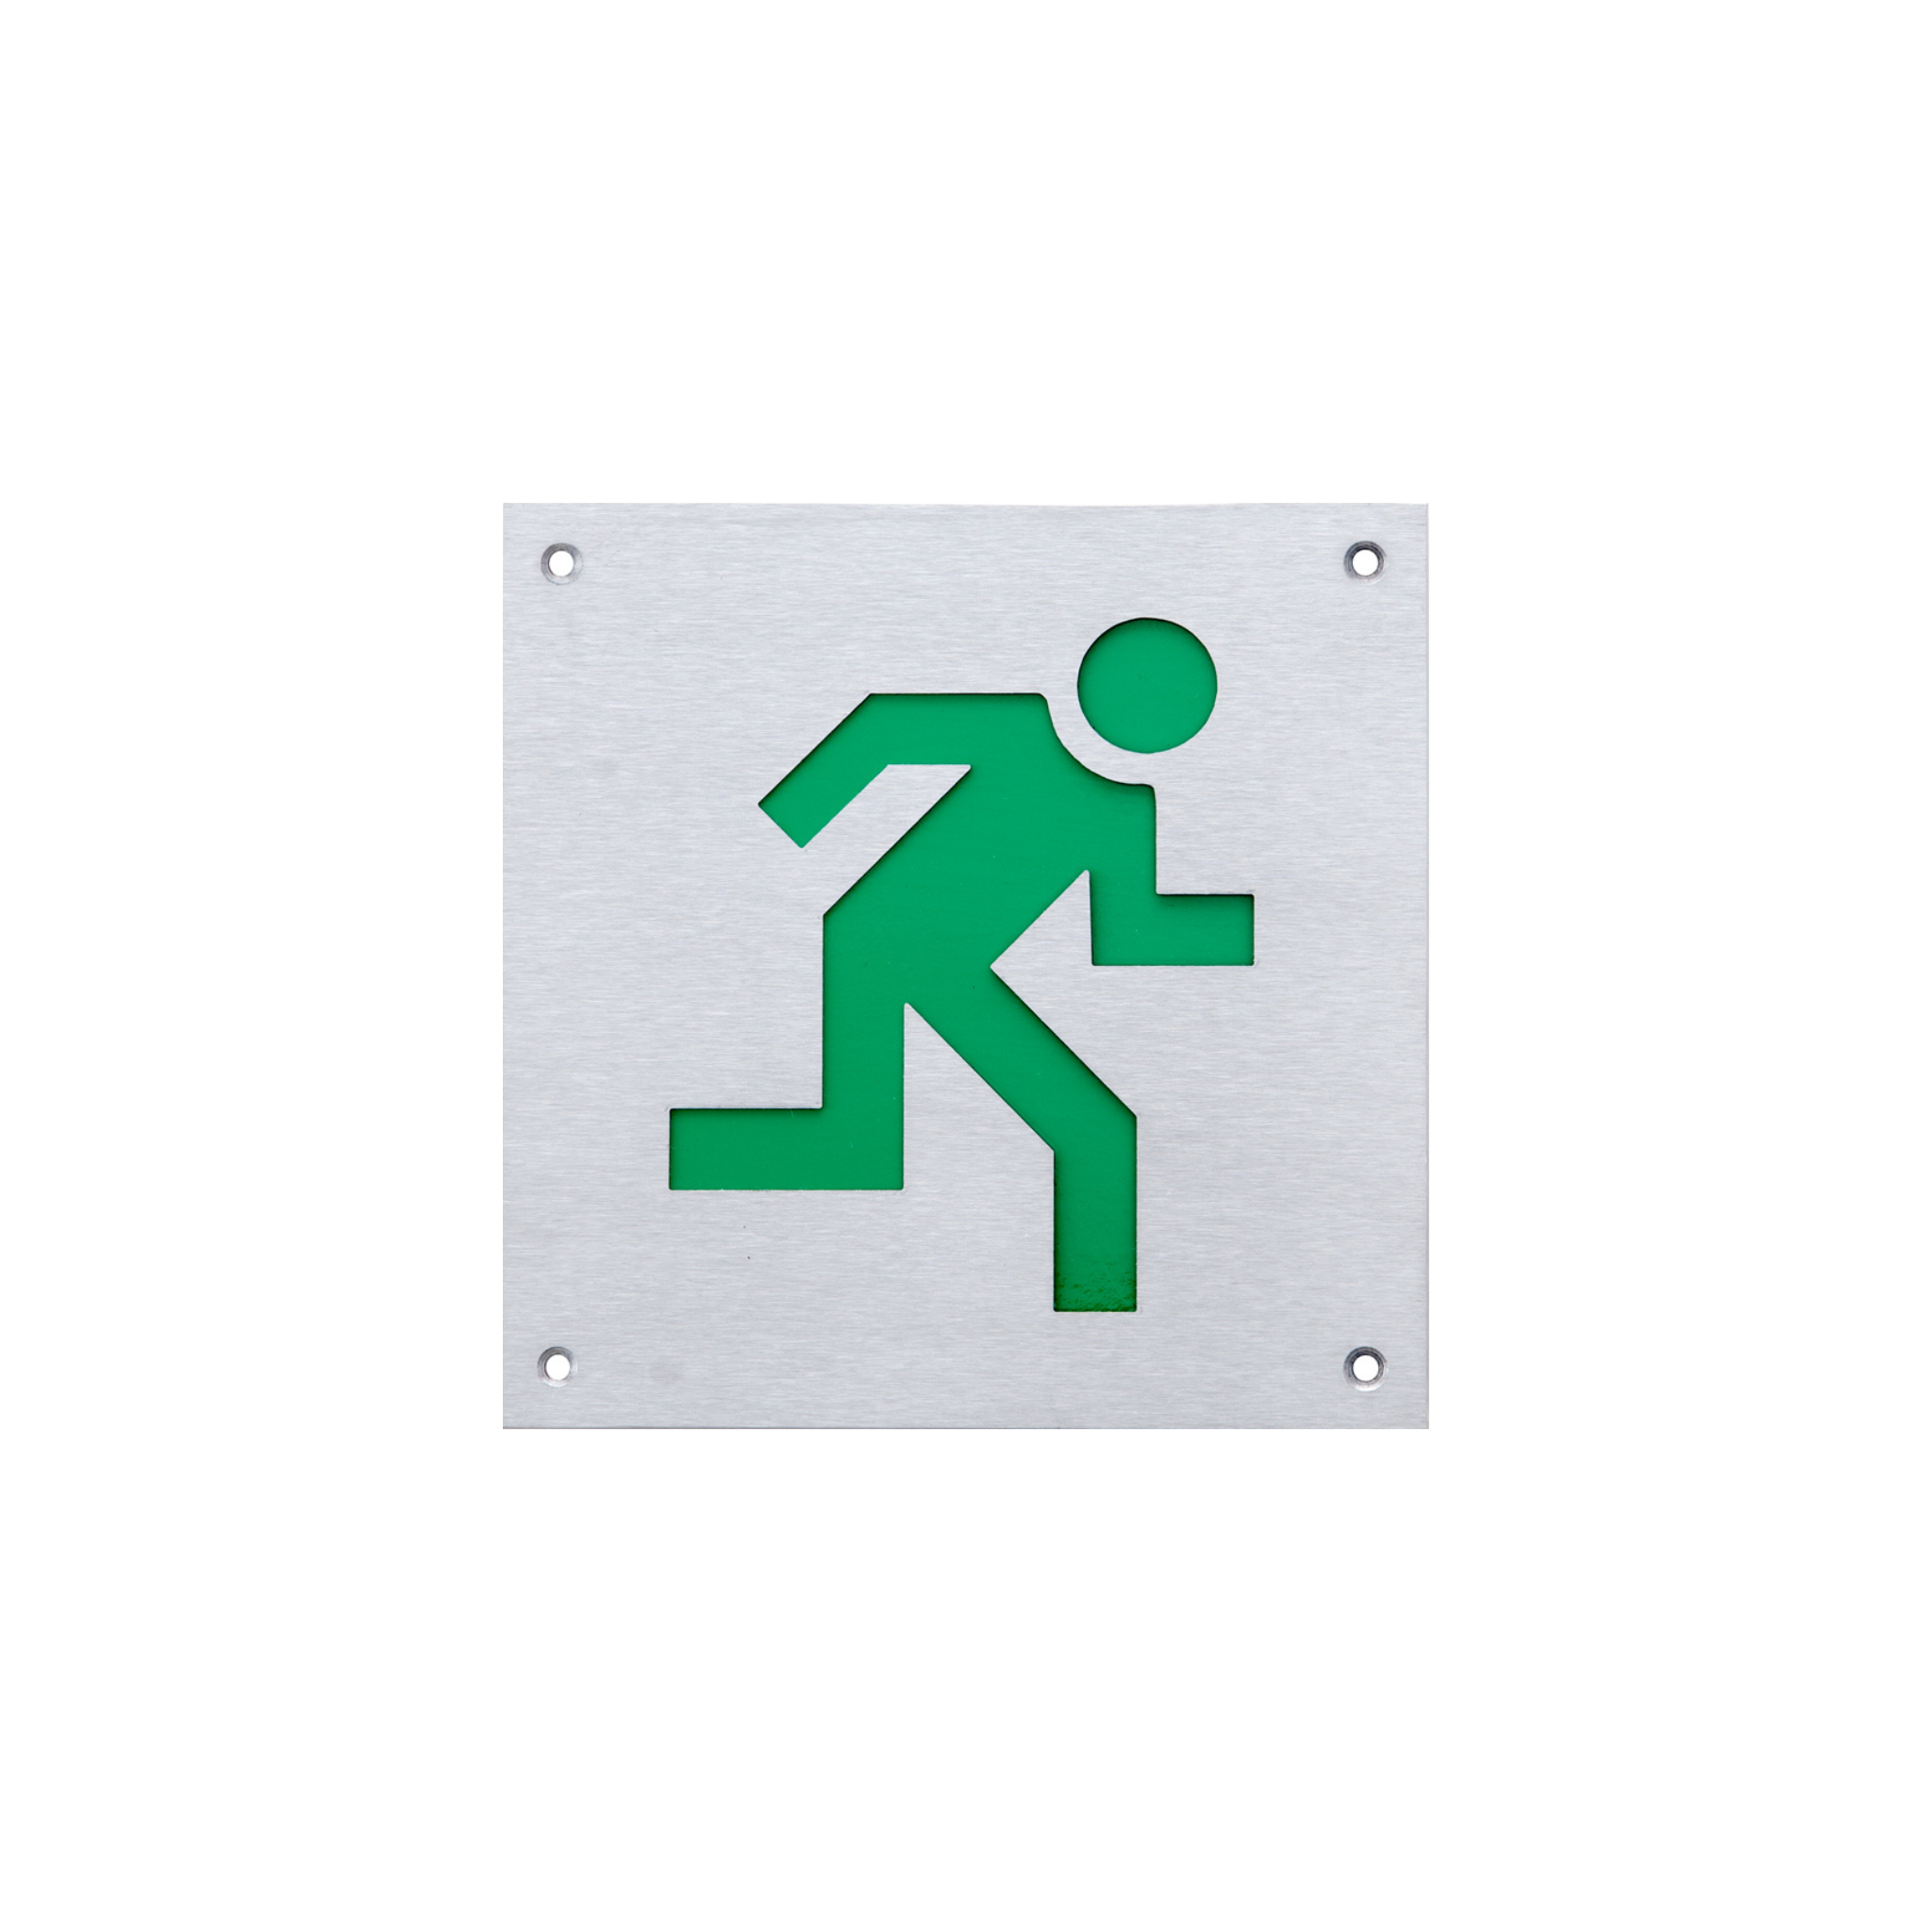 DSS-140, Door Signage, Man Running Right , 150mm (l), 150mm (w), 1,2mm (t), Stainless Steel, DORMAKABA